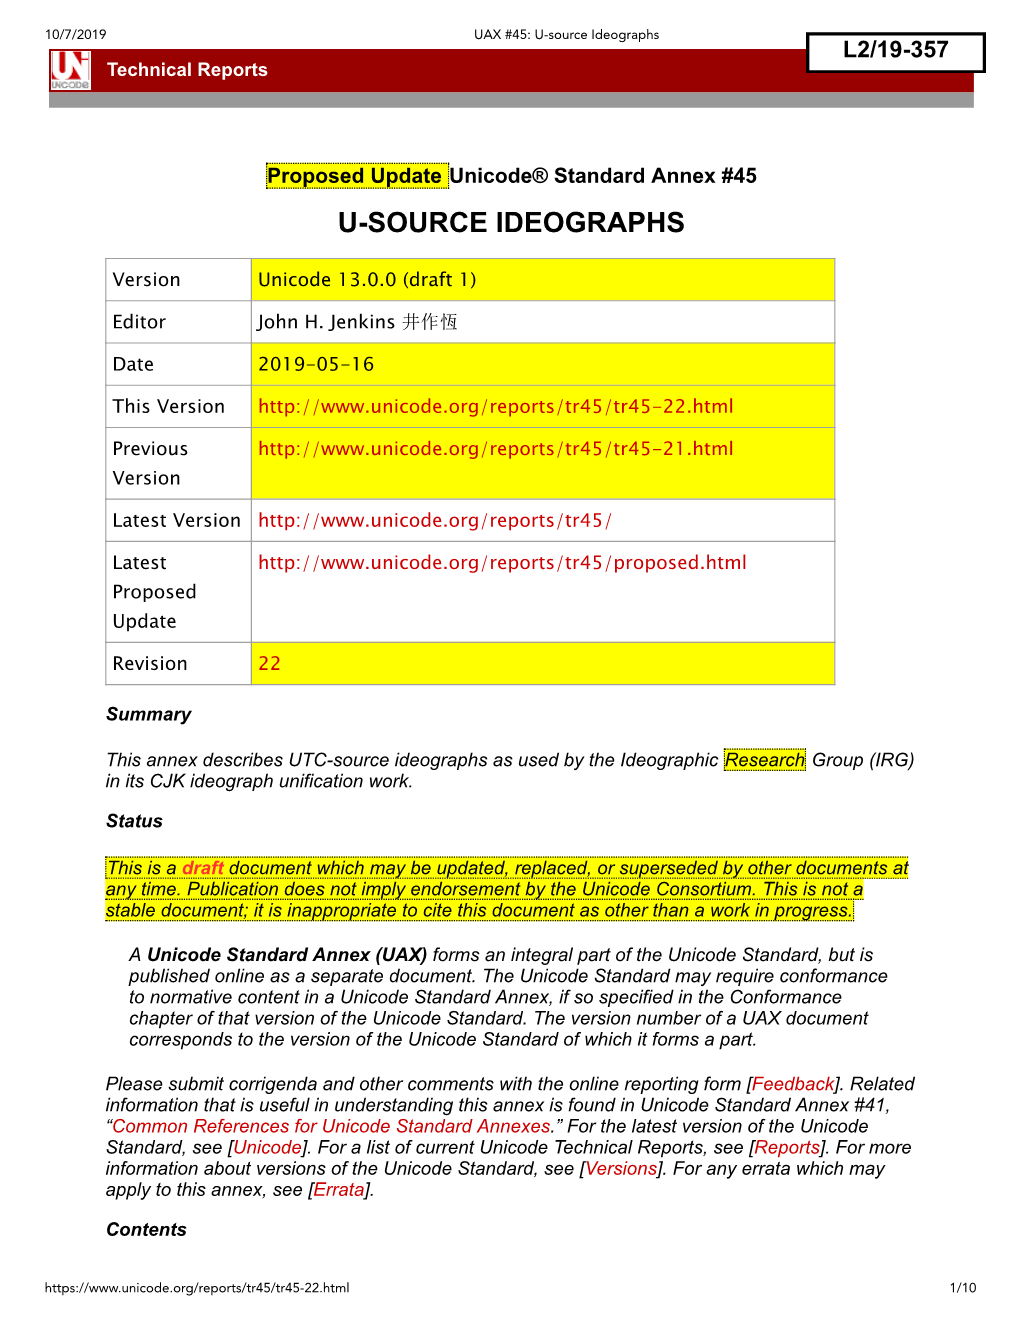 U-Source Ideographs Technical Reports